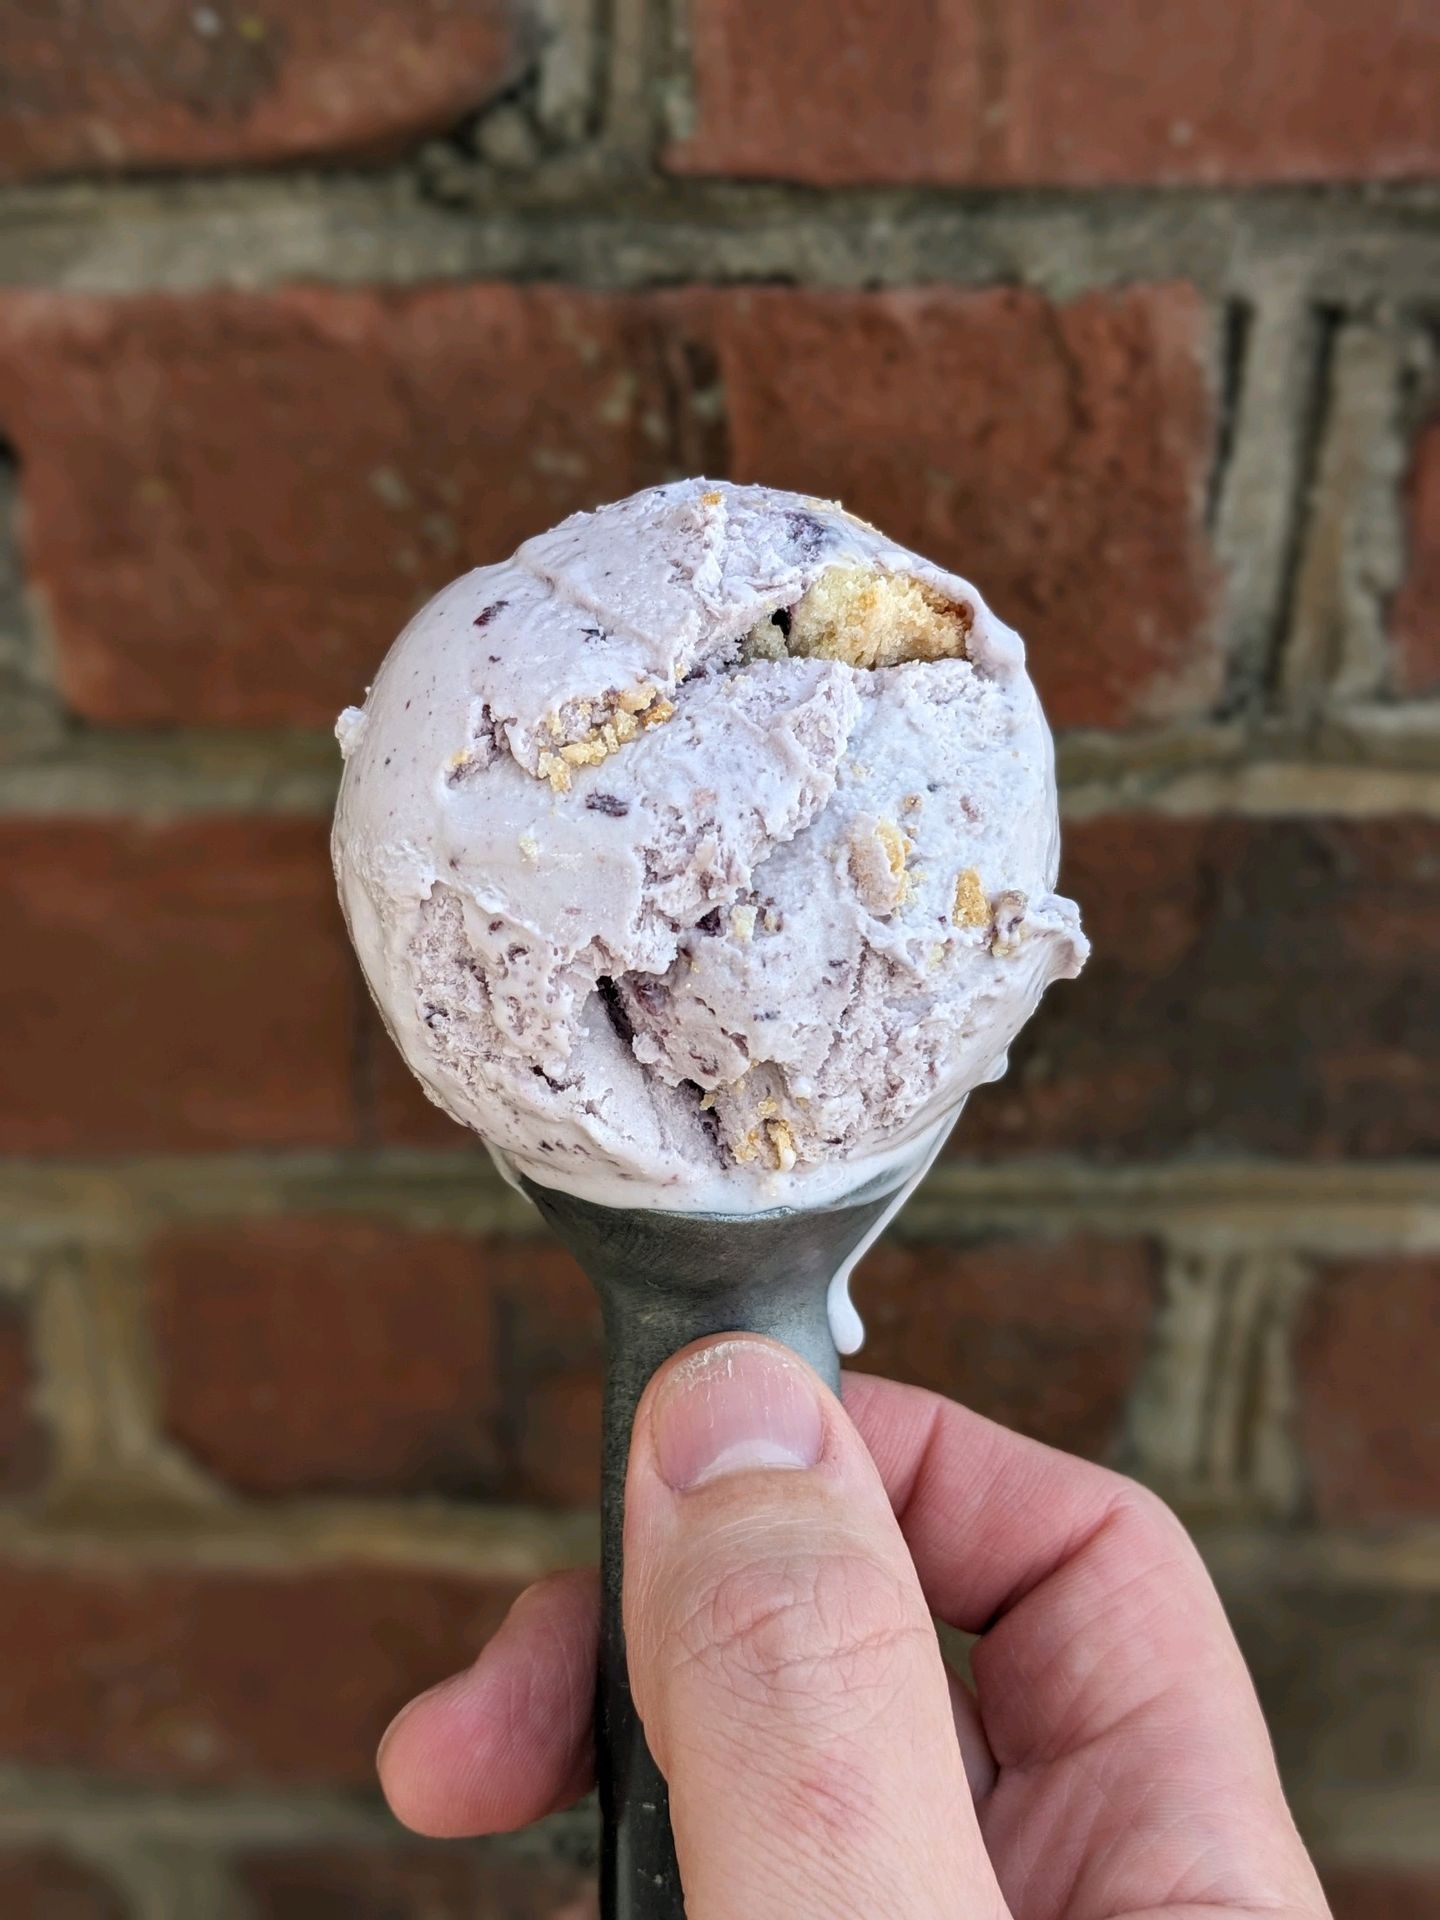 Purple ice cream, chunks of pie crust and blueberries mixed in. Ball of ice cream on an ice cream scoop with a brick wall in the background